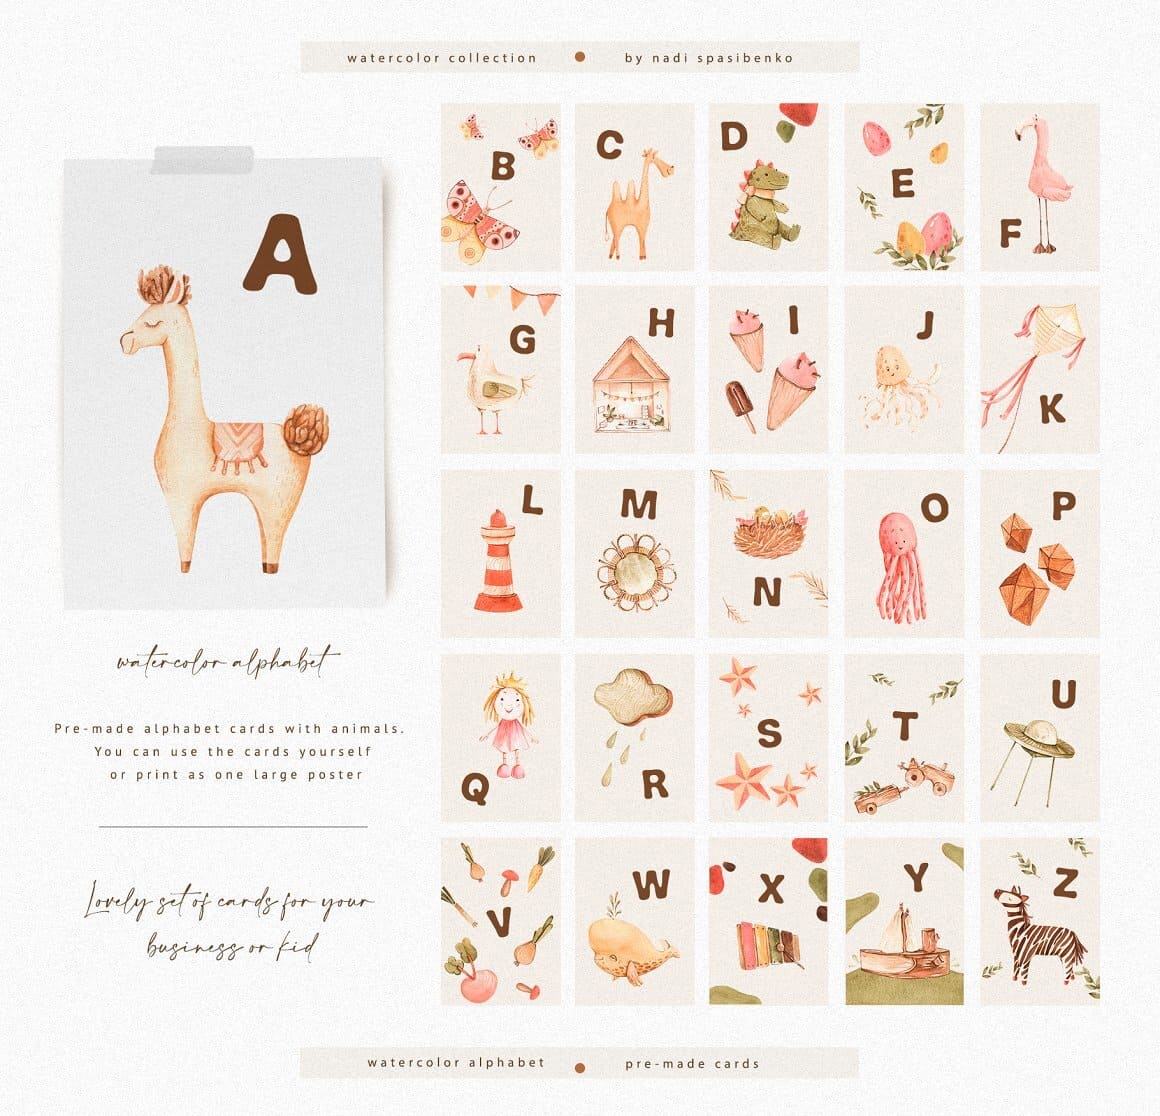 Pre-made cards with watercolor alphabet.